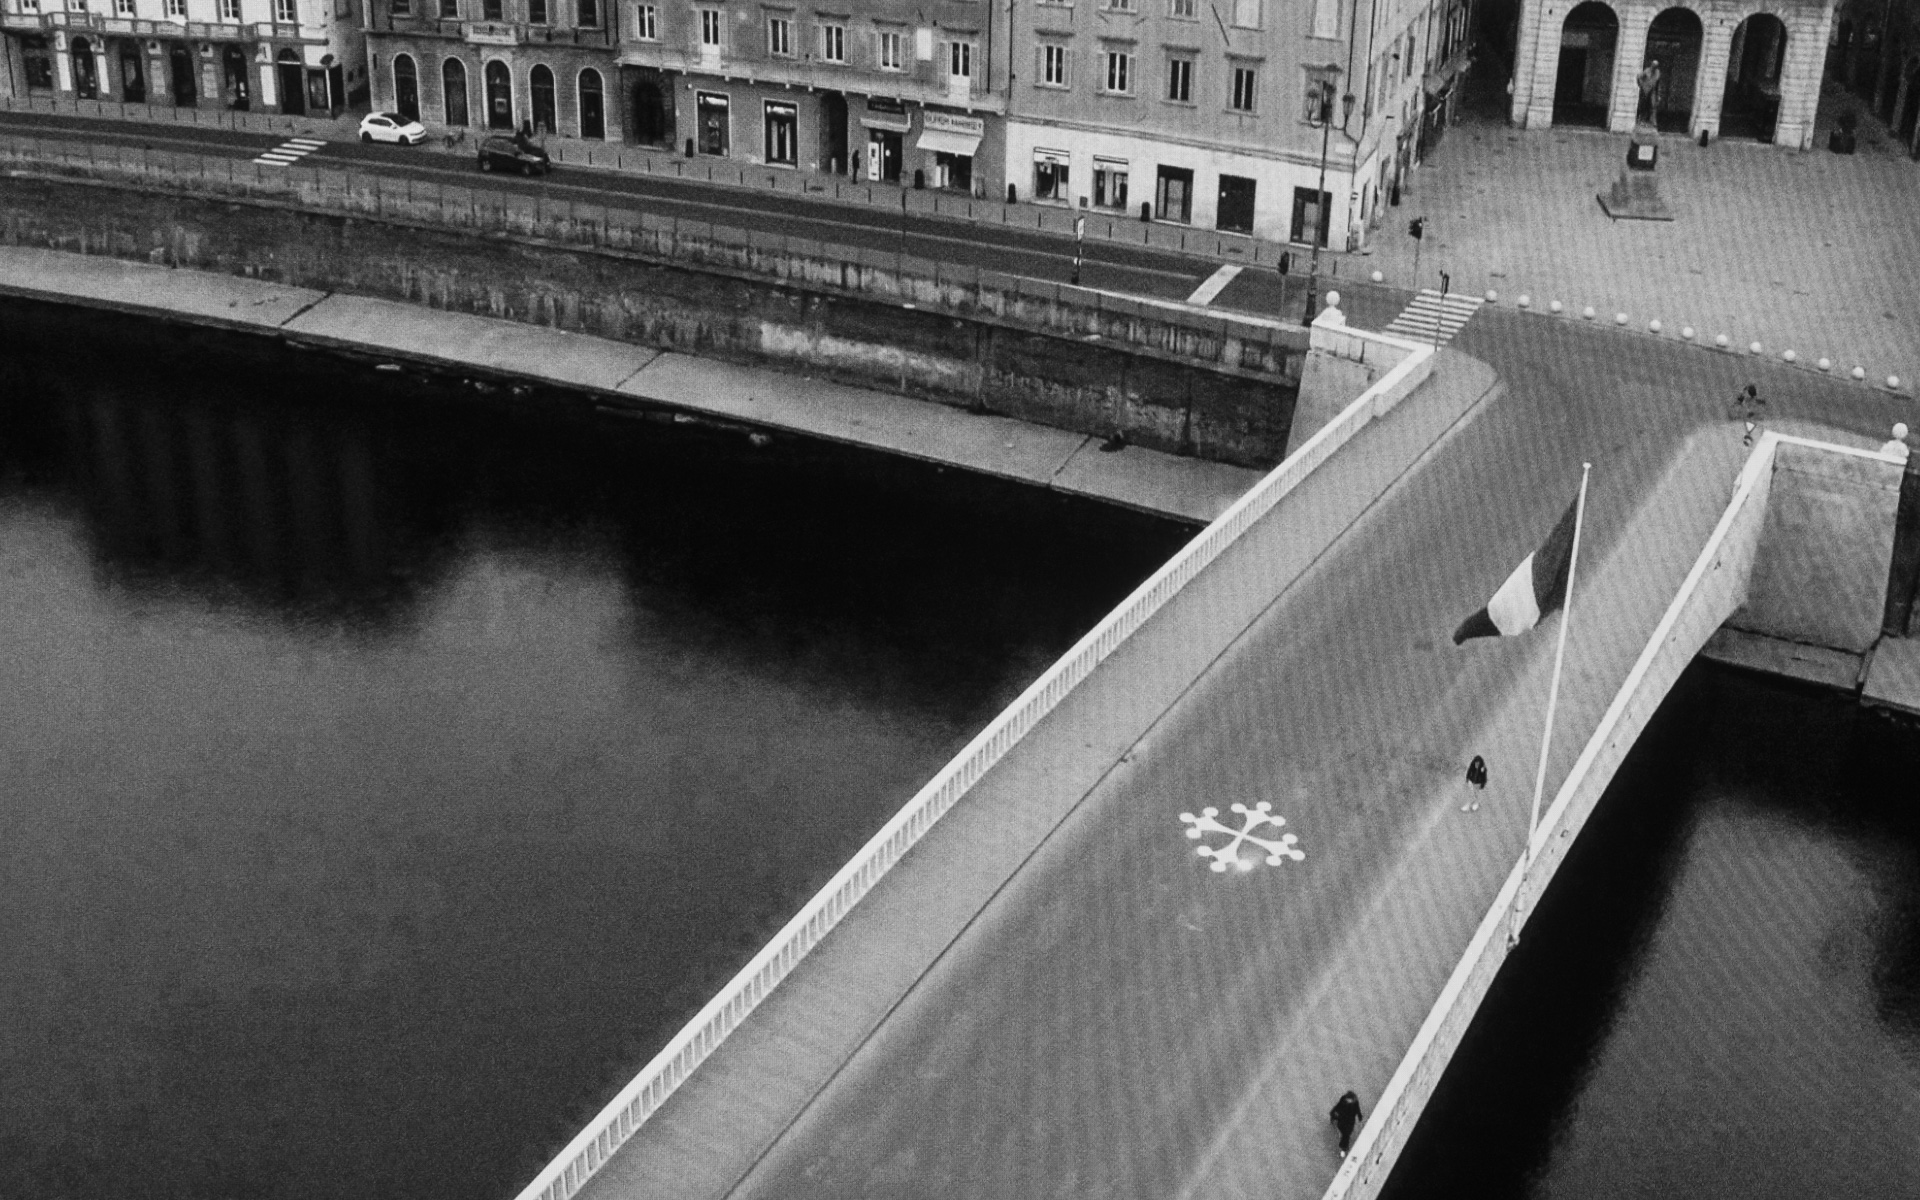 Pisa, Mezzo Bridge and Garibaldi Square - Two lonely figures crossing the bridge over the river Arno near the famous leaning tower of Pisa, March 26. 2020.